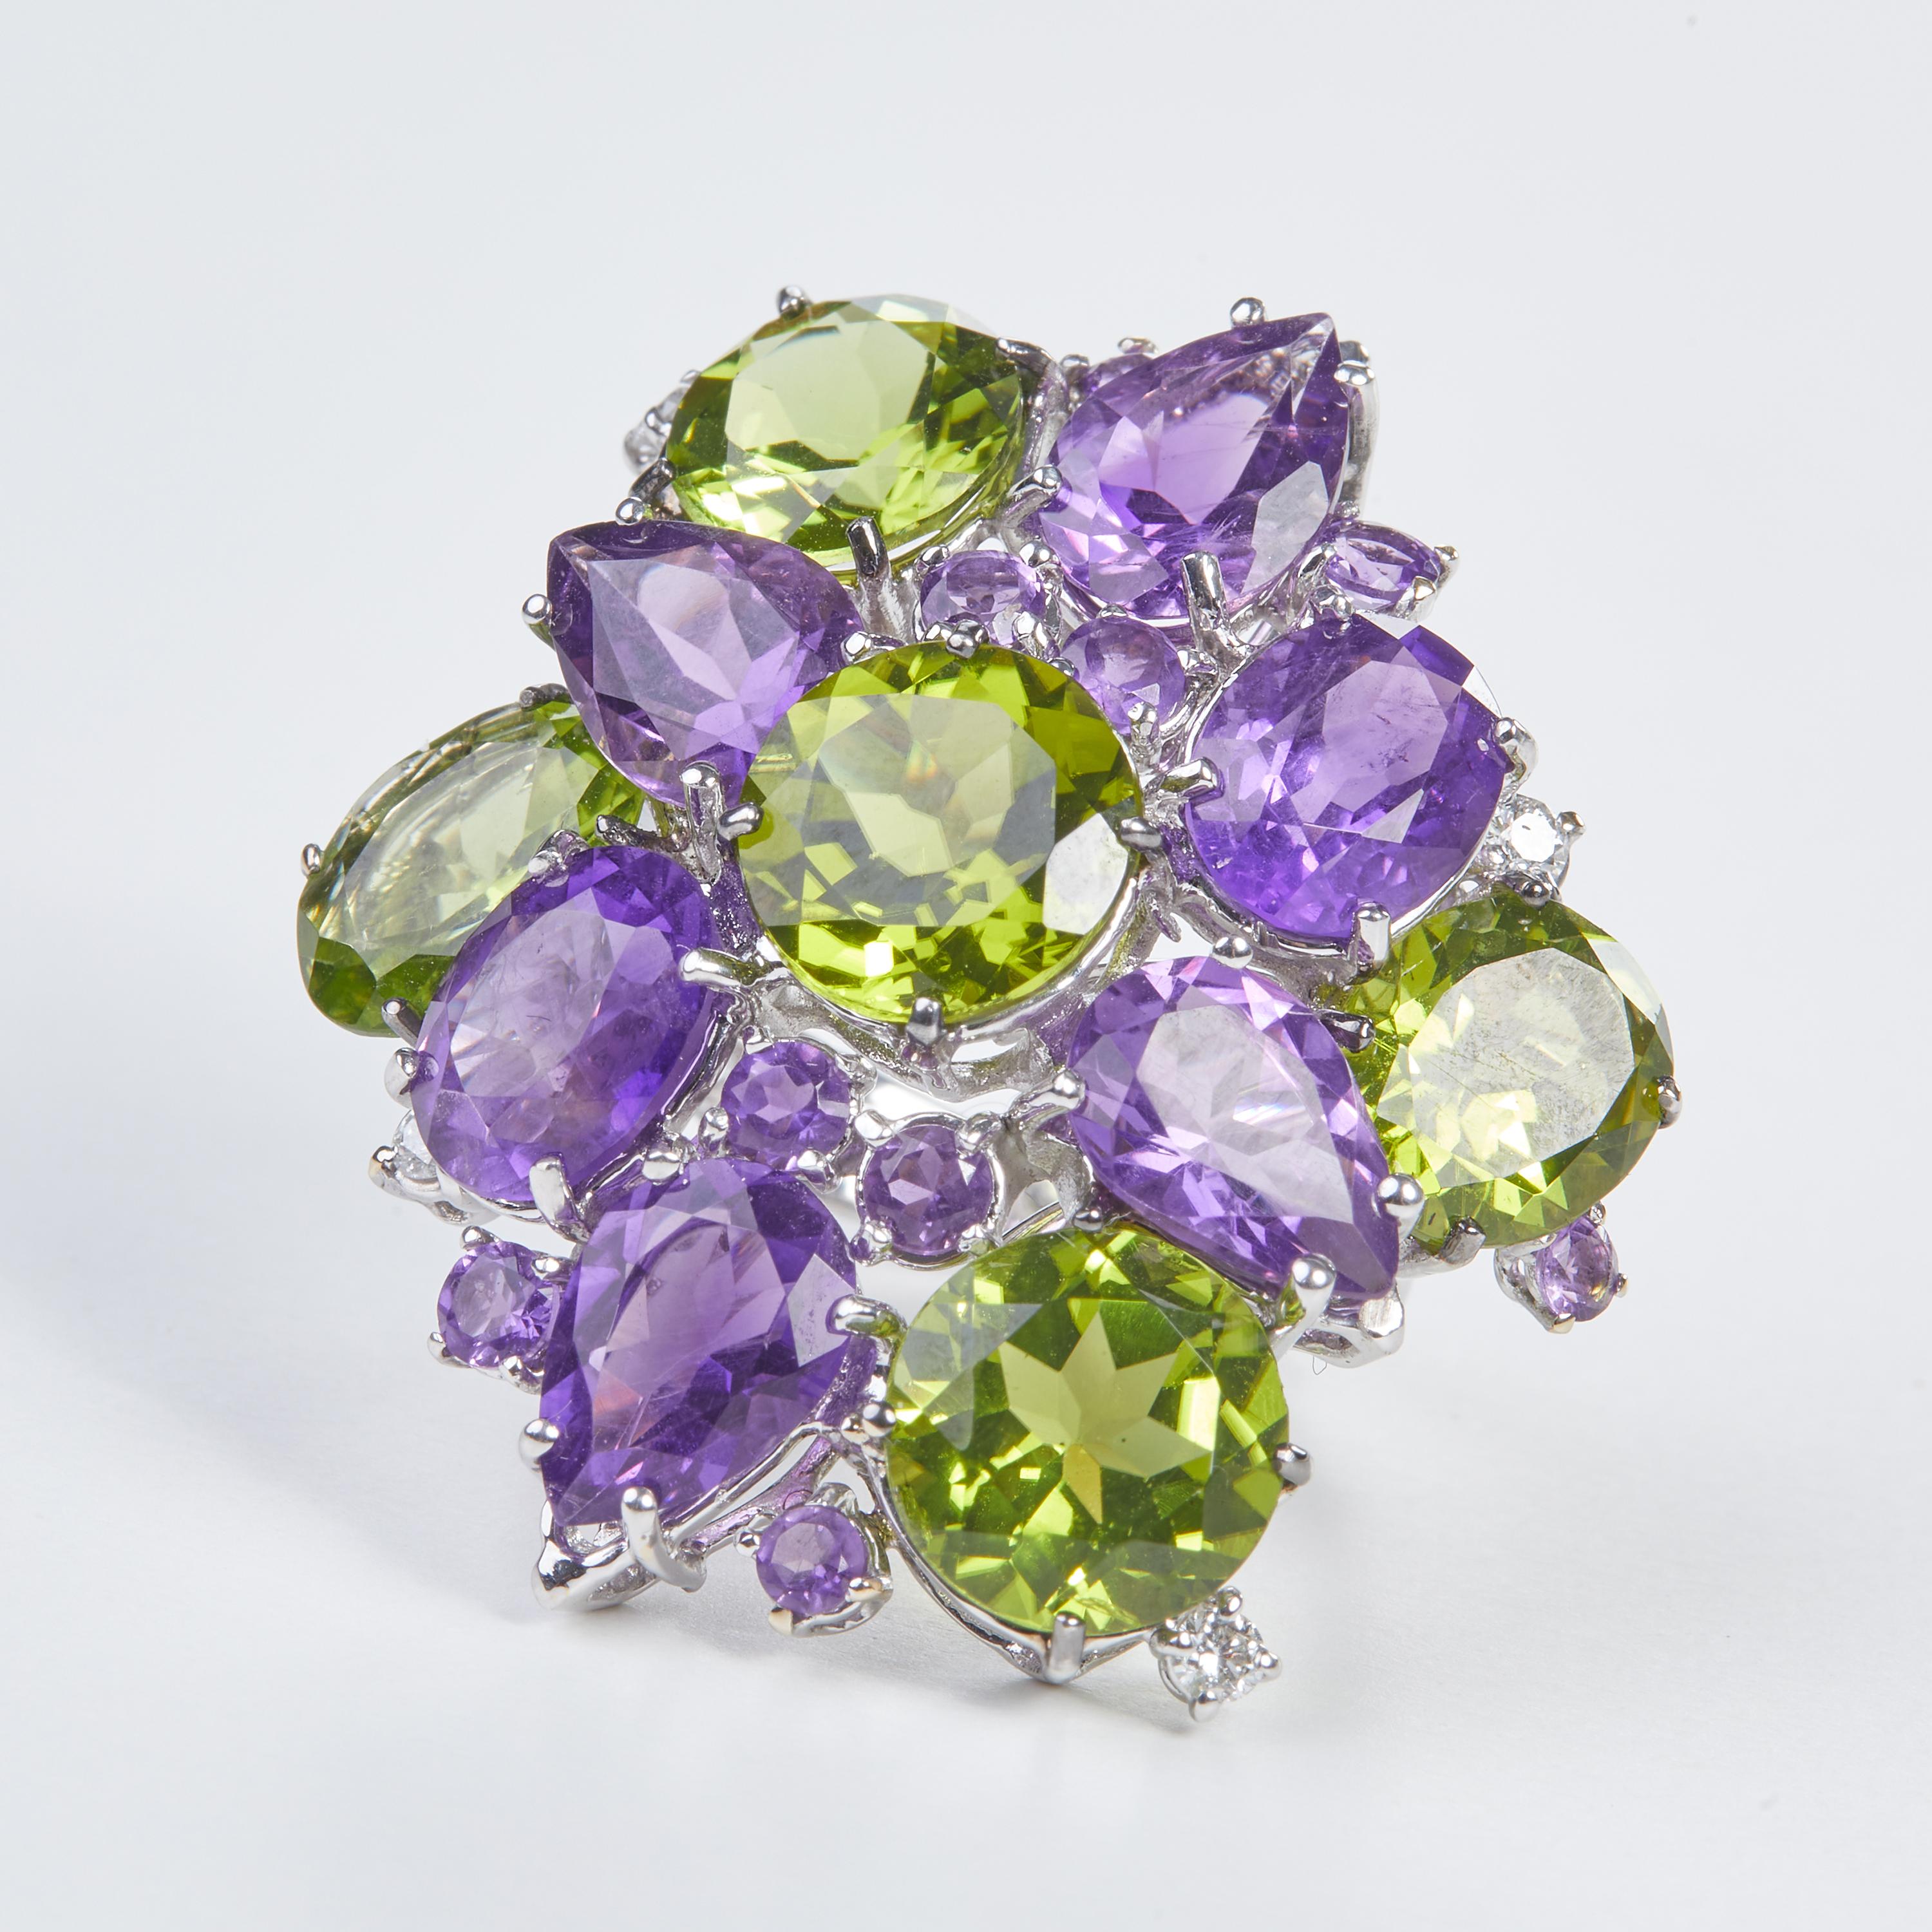 18 Karat WG Diamond Peridot and Amethyst Coktail Ring
4  Diamonds 0,25 Carat
10 Amethist  1.40Carat
6 Amethyst  9.09 Carat
5 Peridot  14.67 Carat

Founded in 1974, Gianni Lazzaro is a family-owned jewelery company based out of Düsseldorf,